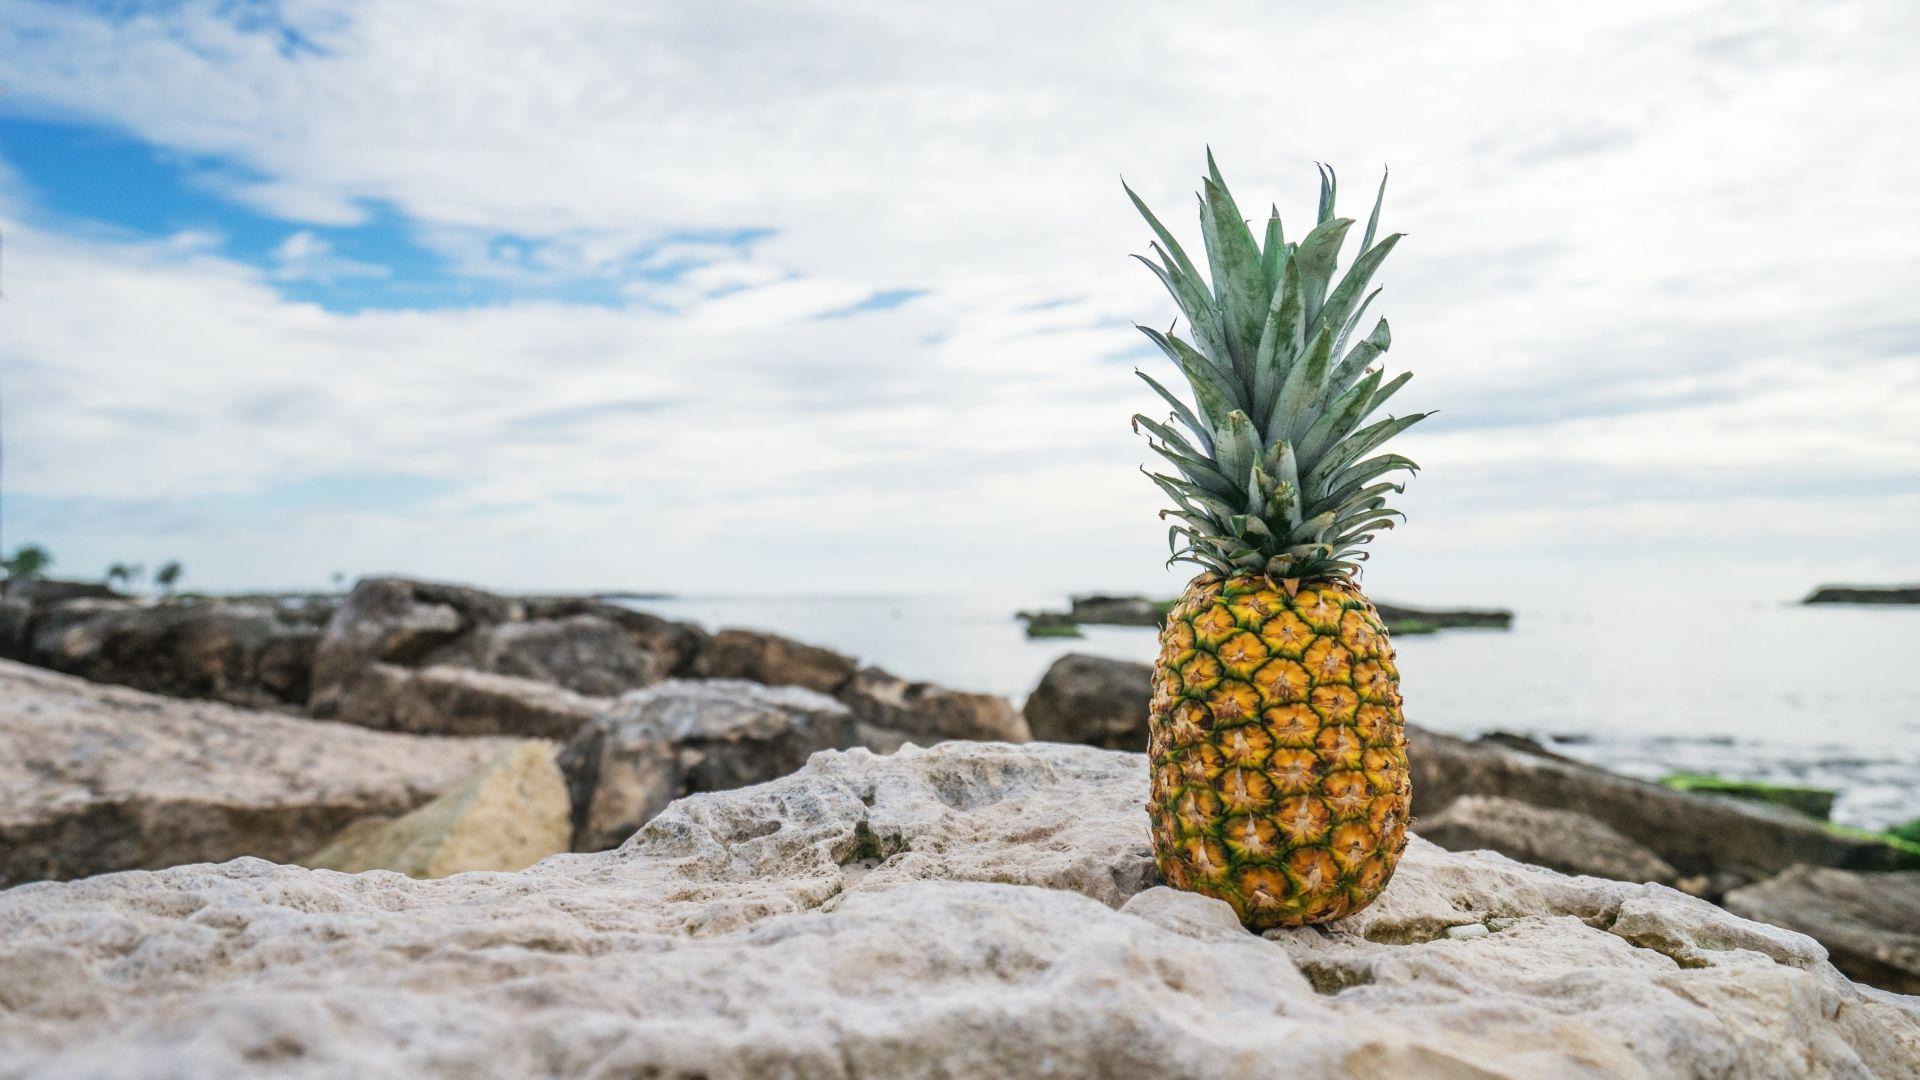 Pineapple Photography HD Wallpaper 61704 1920x1080px